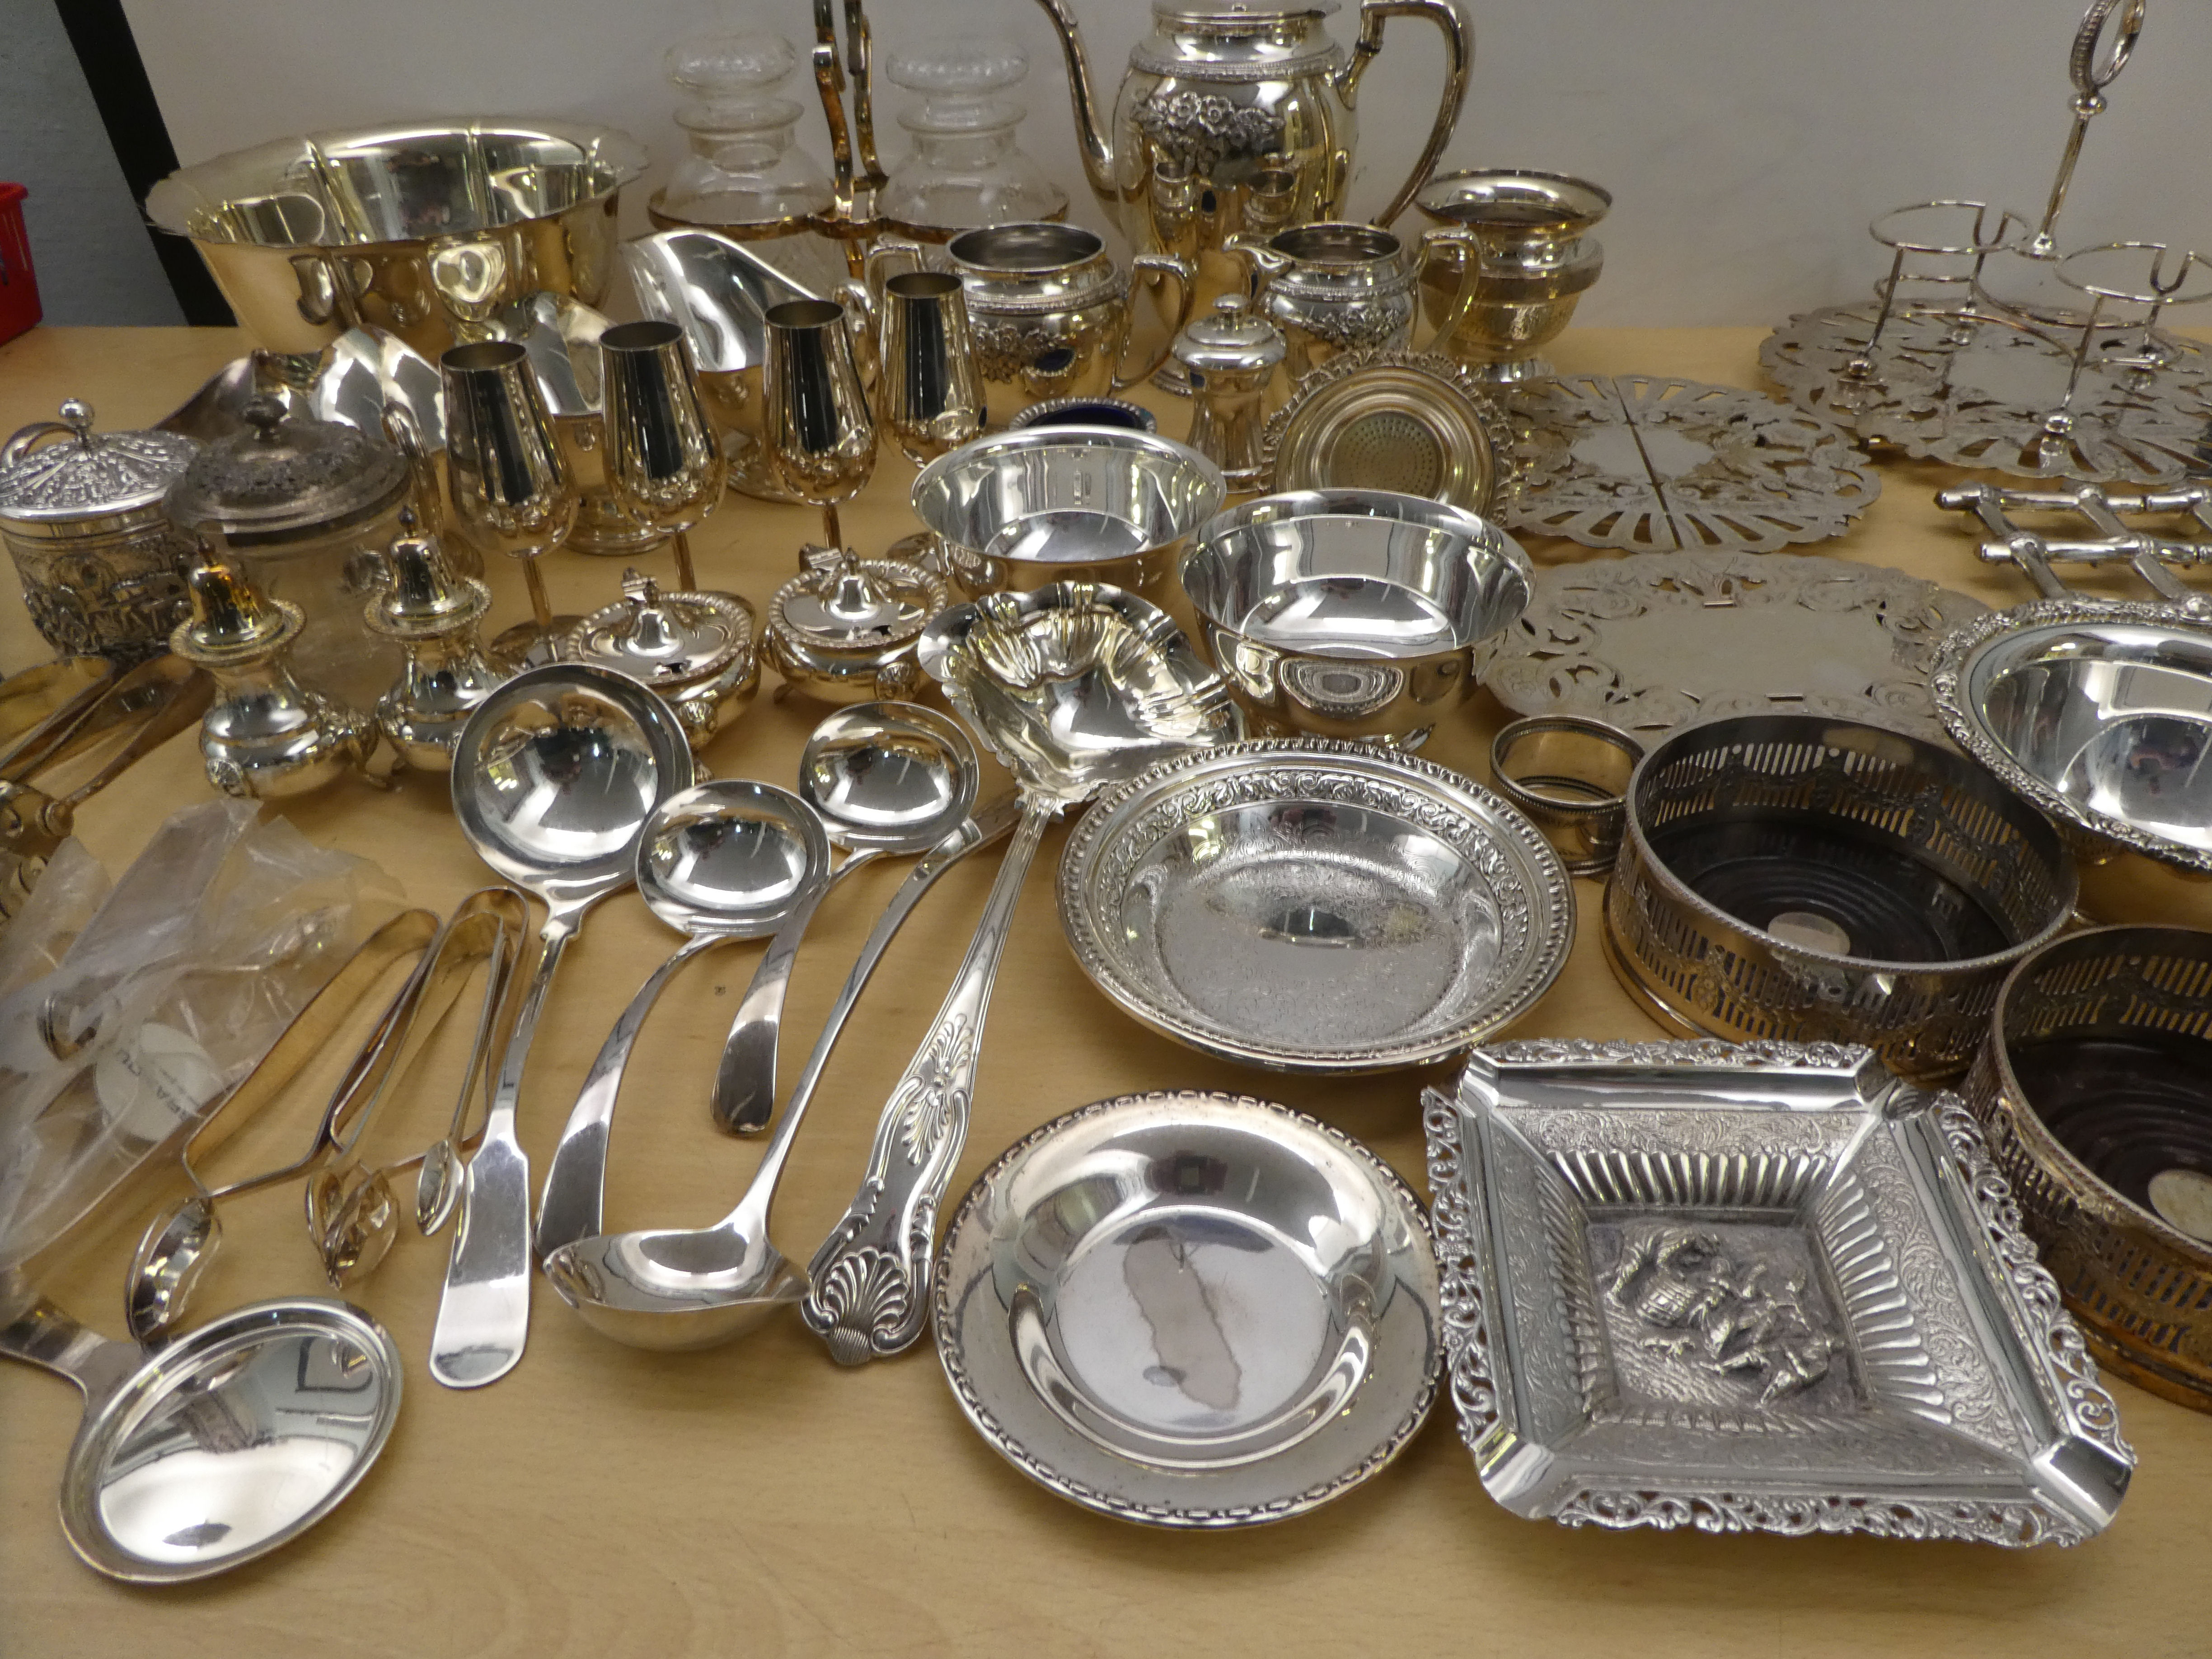 Silver plated tableware, mainly condiments pots and sauce boats - Image 7 of 7